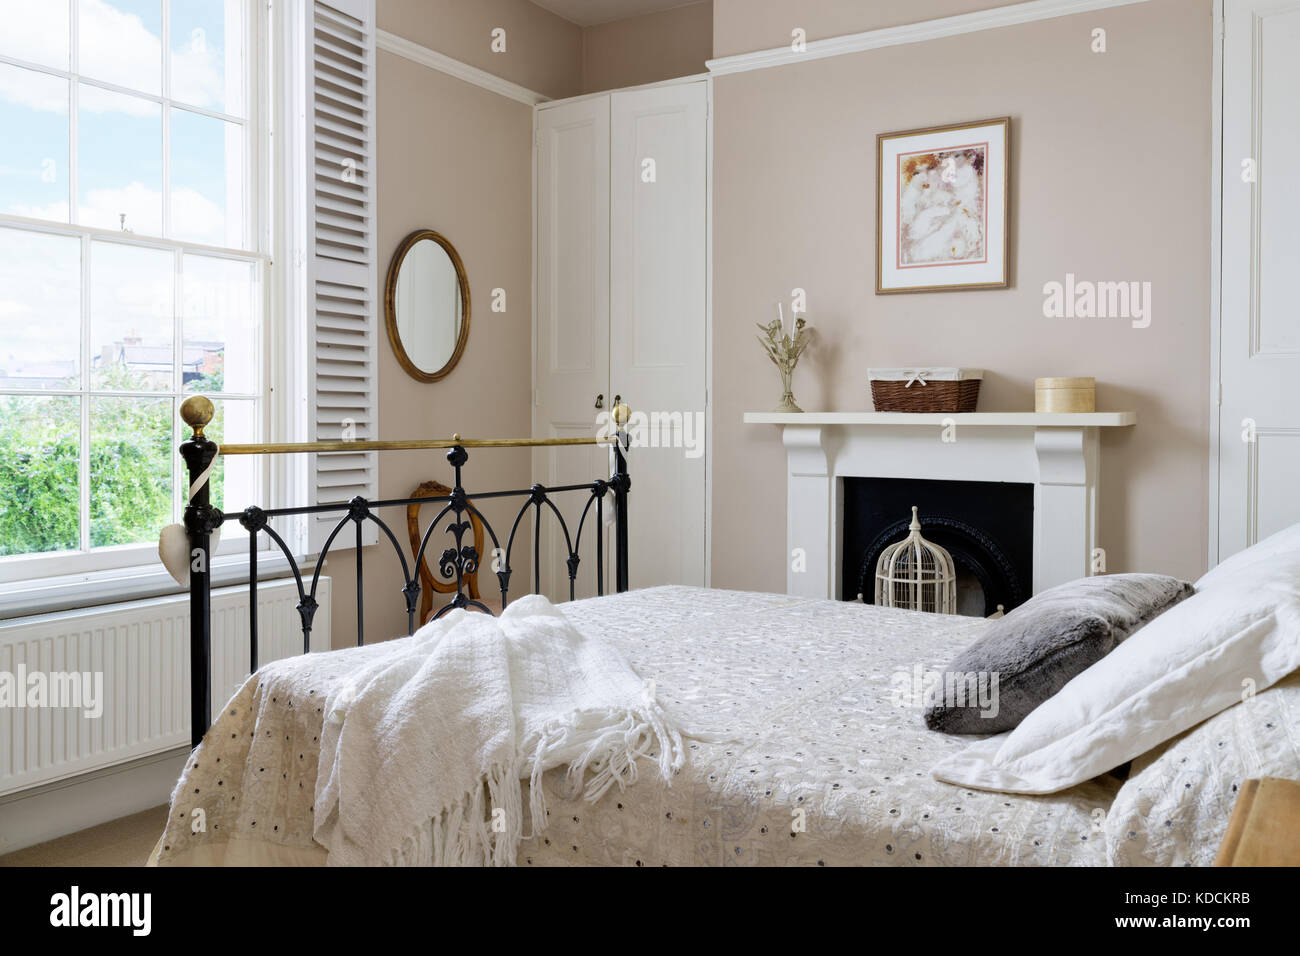 A renovated Victorian bedroom showing a shuttered window, a  fireplace and double bed with iron beadstead. Stock Photo